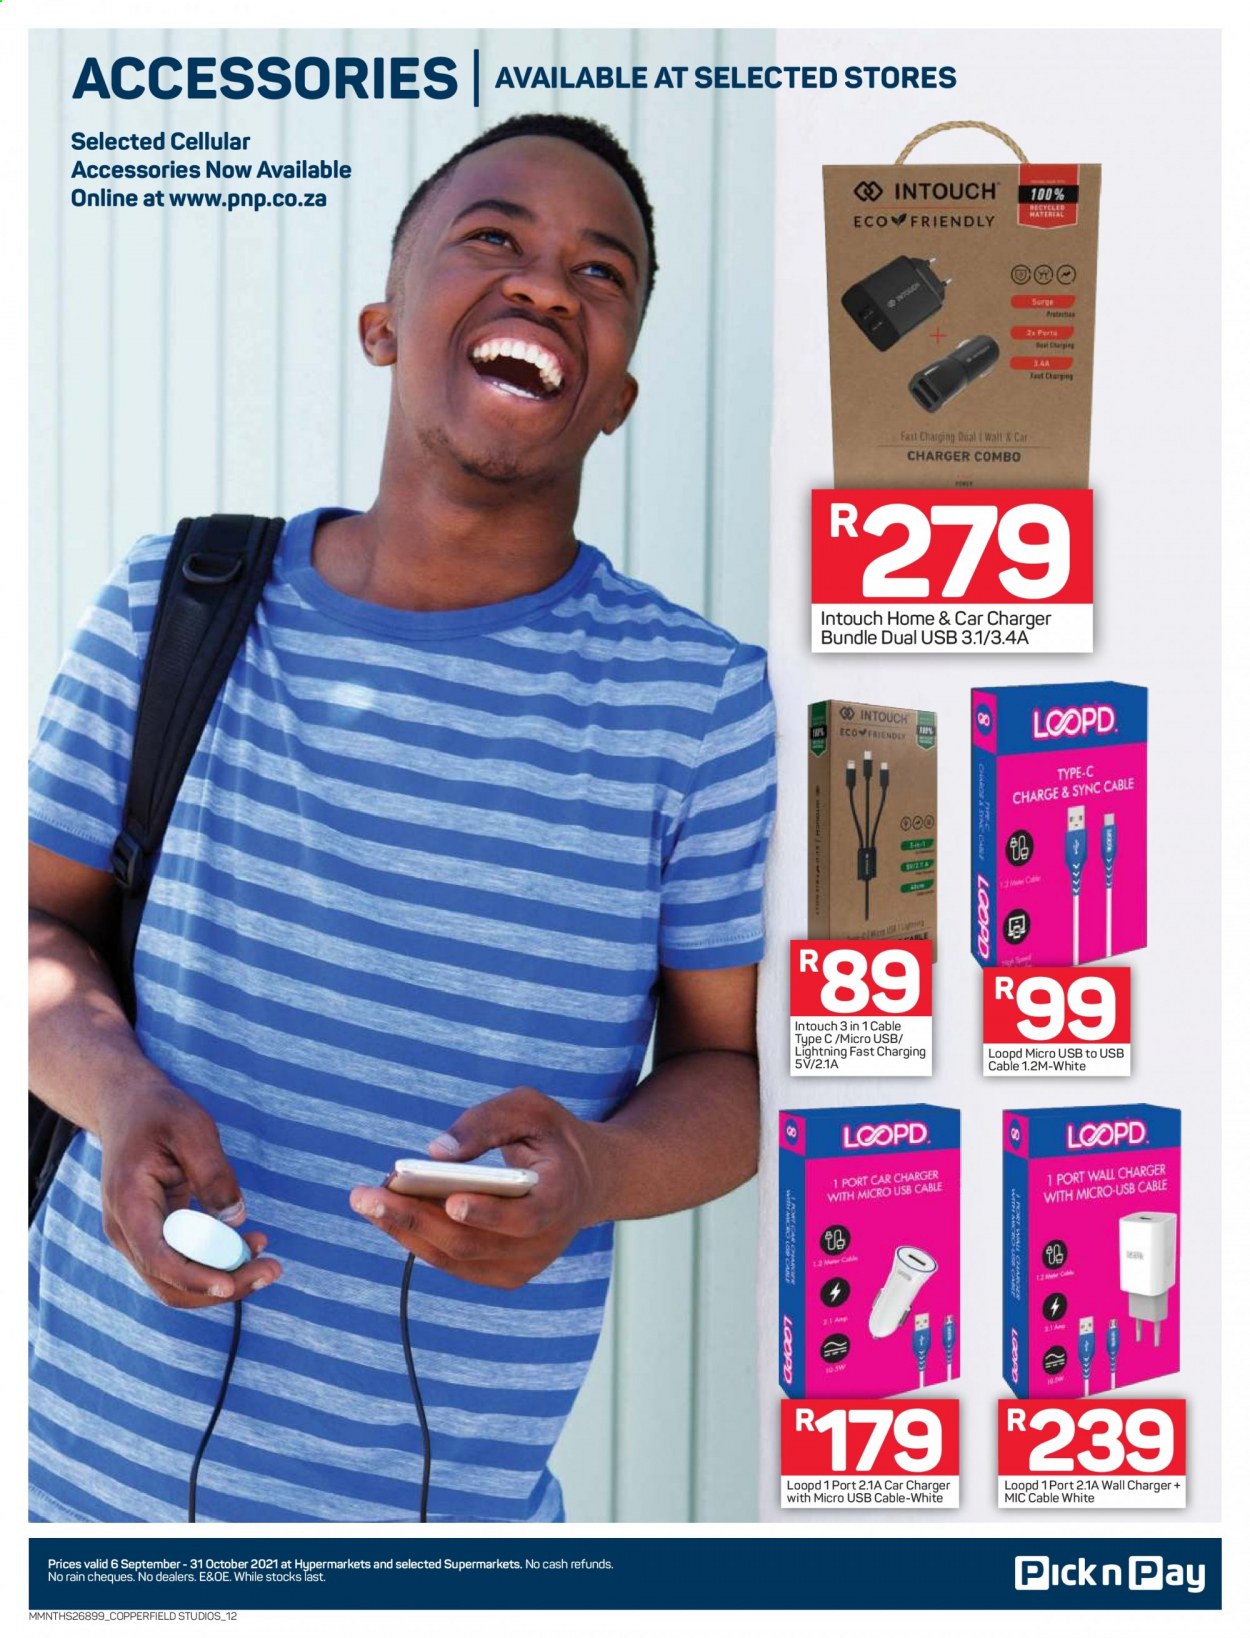 Pick n Pay specials - 09.06.2021 - 10.31.2021. 